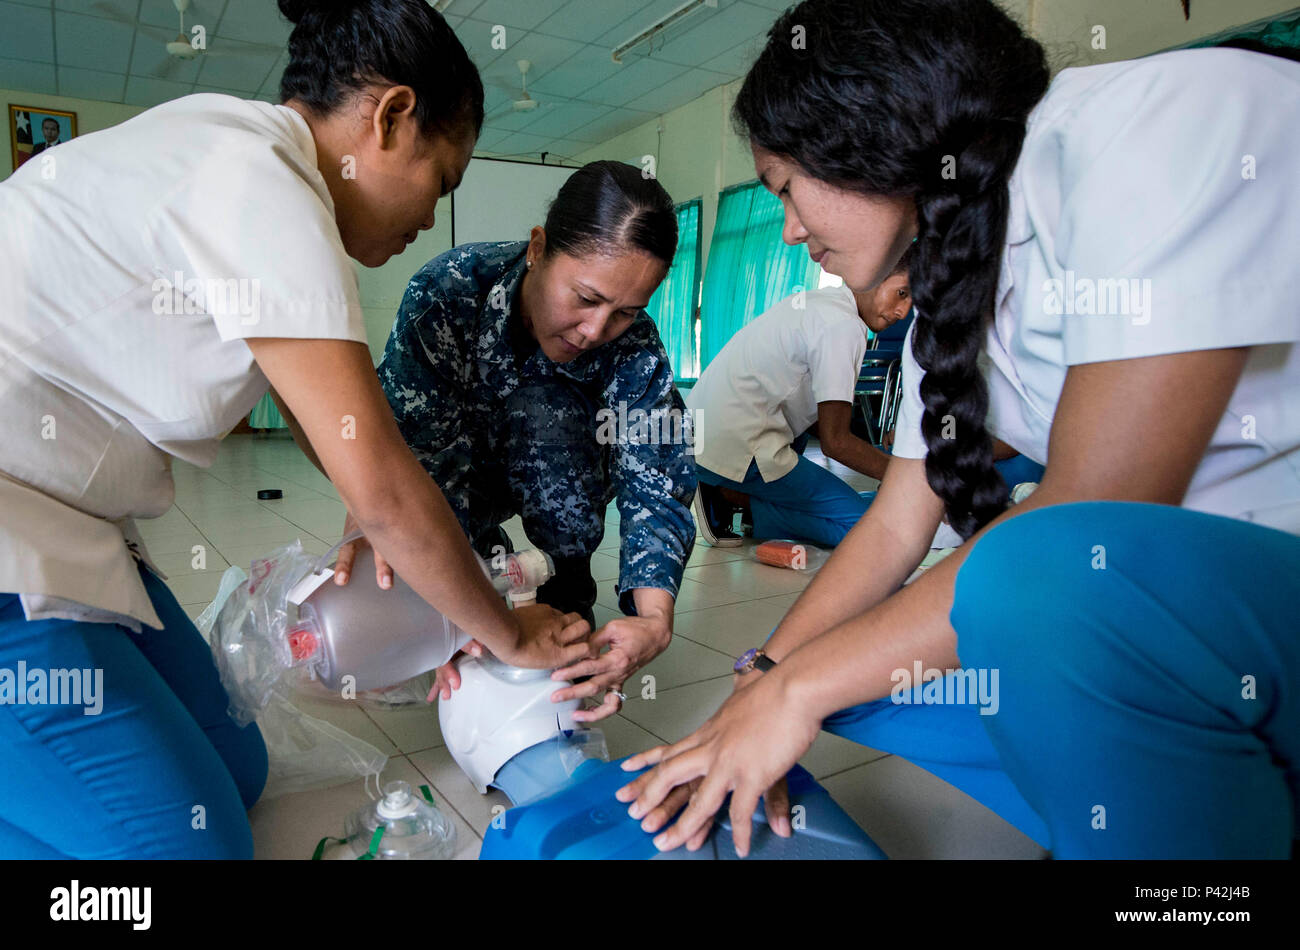 160610-N-QW941-115 DILI, Timor Leste (June 10, 2016) Hospital Corpsman 1st Class Rosella Reyes, a native of the Philippines, conducts basic life support training for Timorese students at the International Health Institute during Pacific Partnership 2016. This year marks the sixth time the mission visited Timor Leste since its first visit in 2006. Medical, engineering and various other personnel embarked aboard hospital ship USNS Mercy (T-AH 19) are working side-by-side with partner nation counterparts, exchanging ideas, building best practices and relationships to ensure preparedness should di Stock Photo